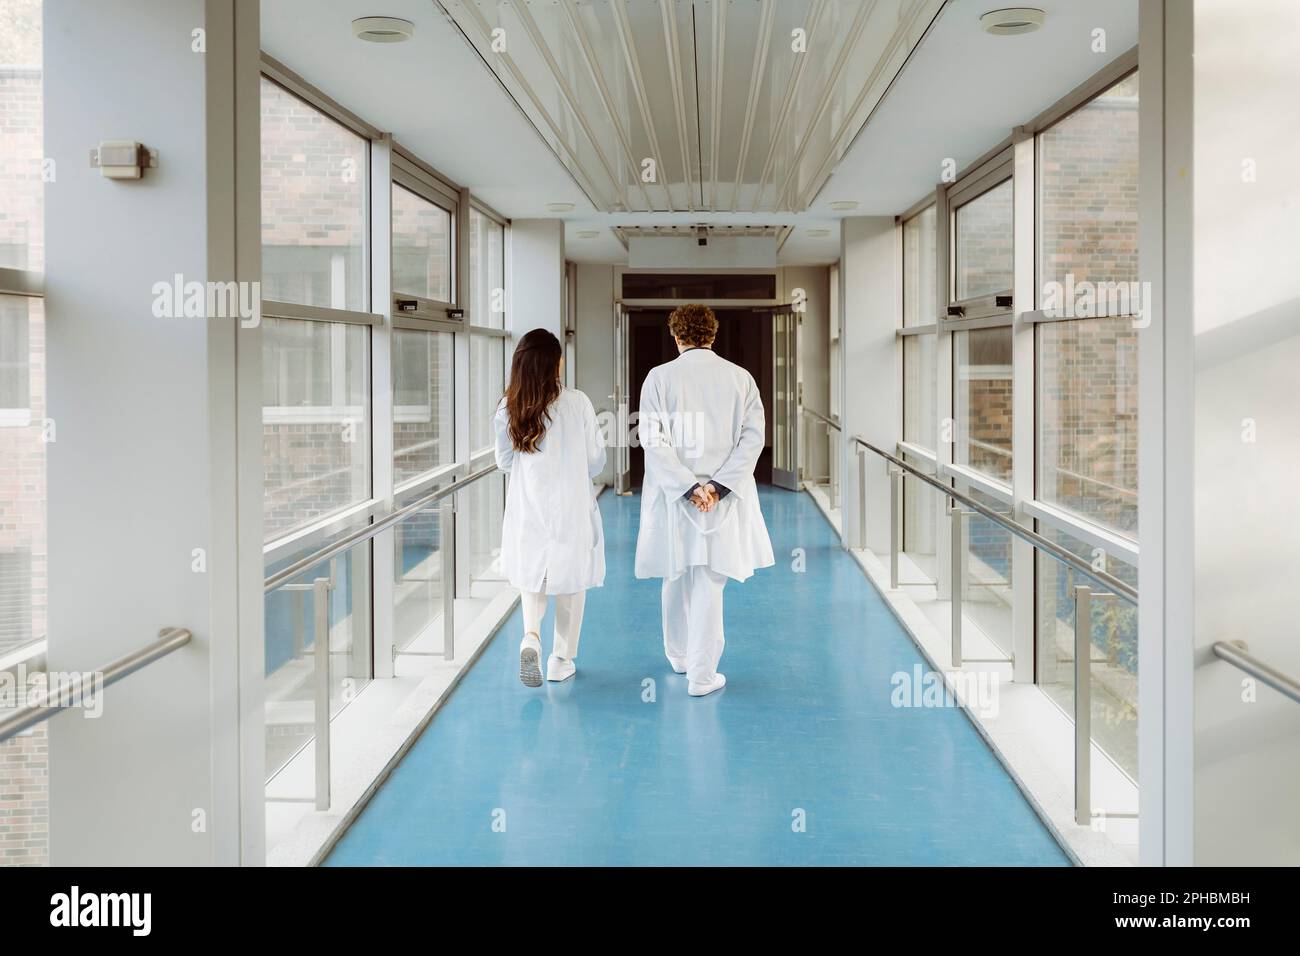 Full length rear view of male and female doctors discussing while walking together in hospital corridor Stock Photo